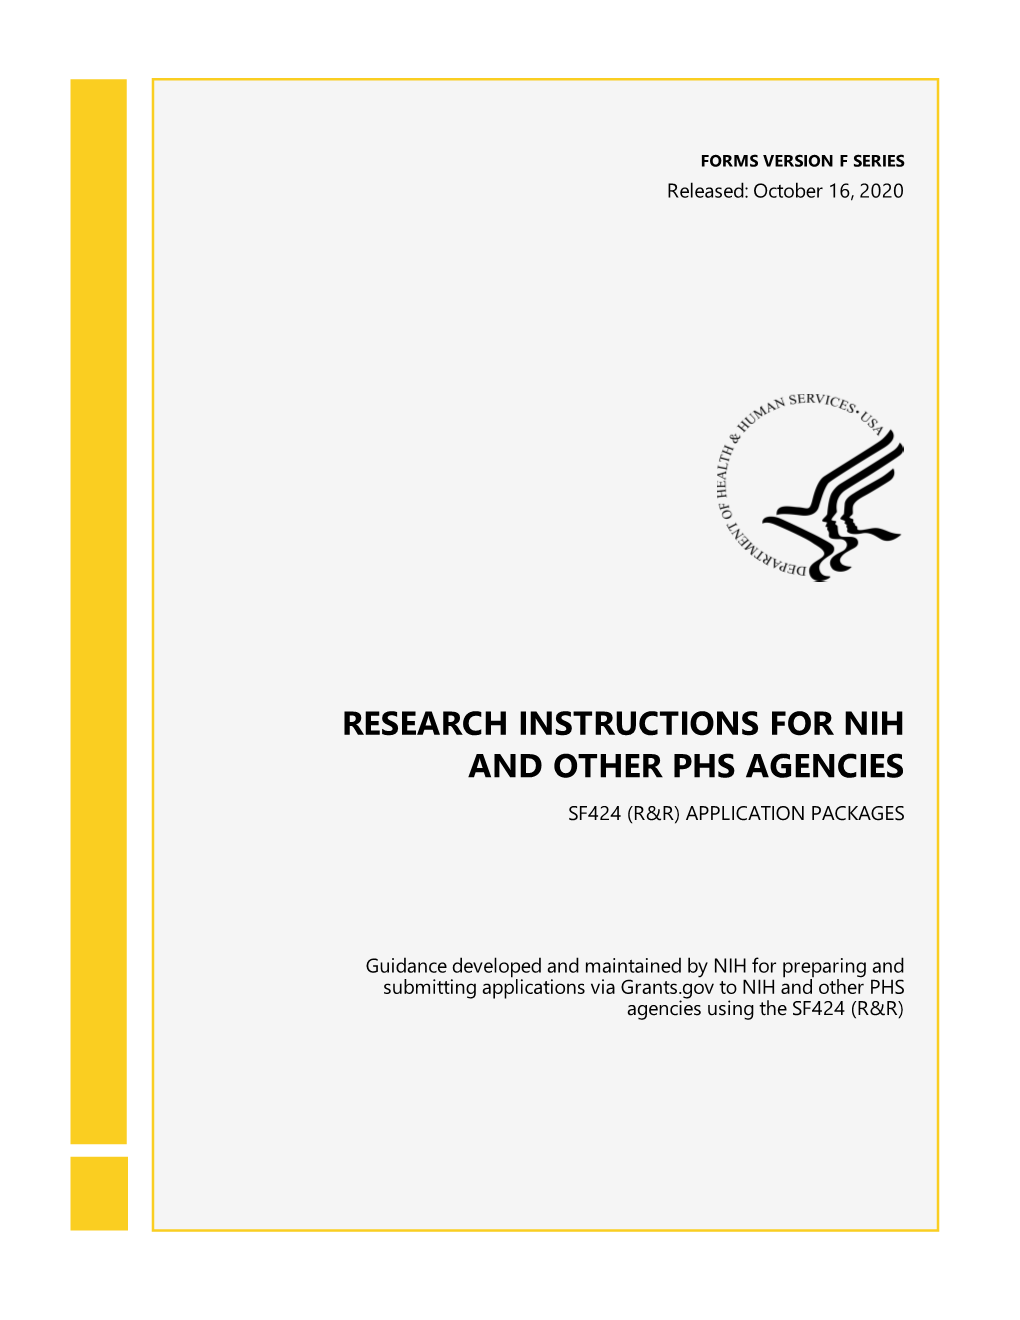 Research Instructions for Nih and Other Phs Agencies Sf424 (R&R) Application Packages